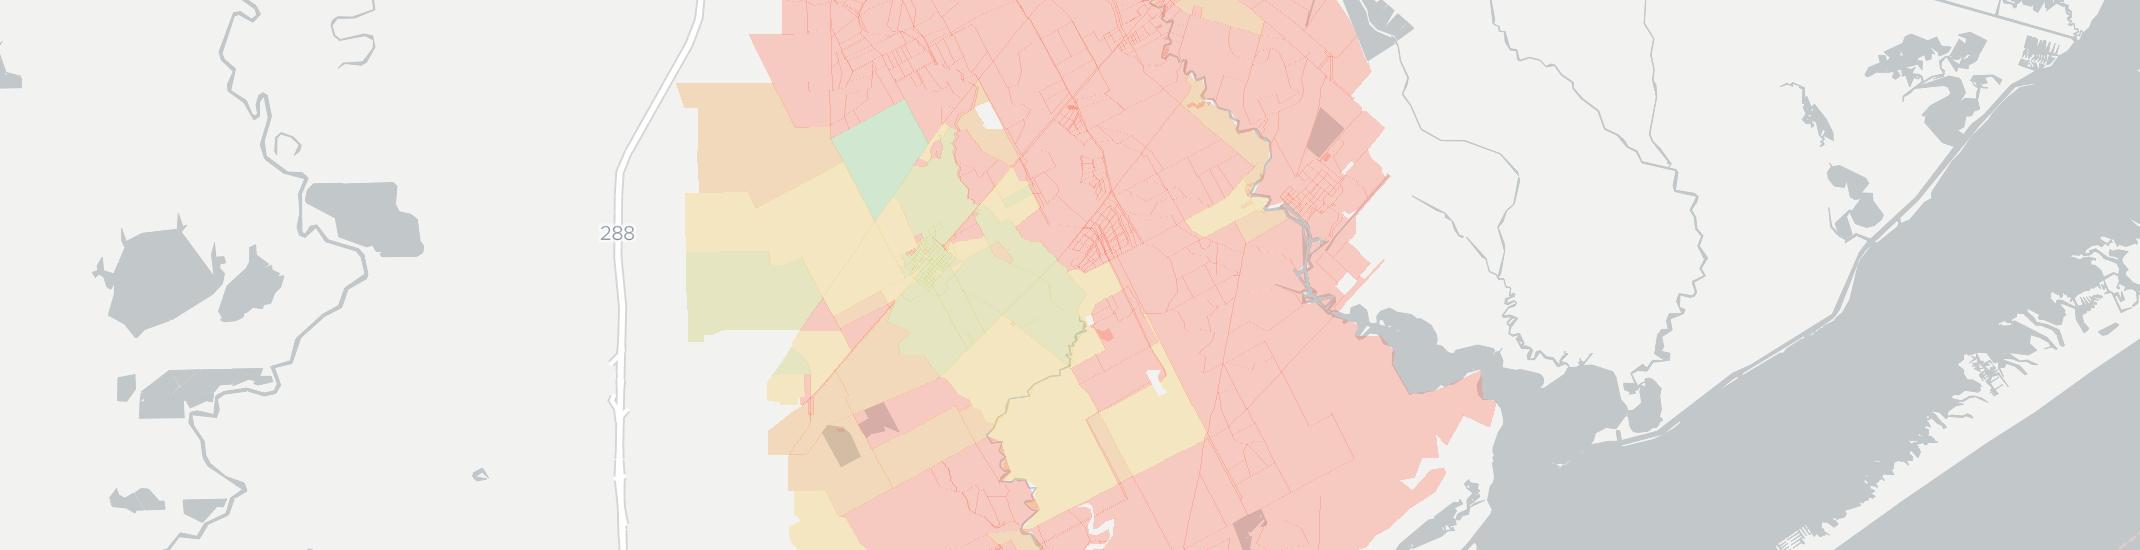 Danbury Internet Competition Map. Click for interactive map